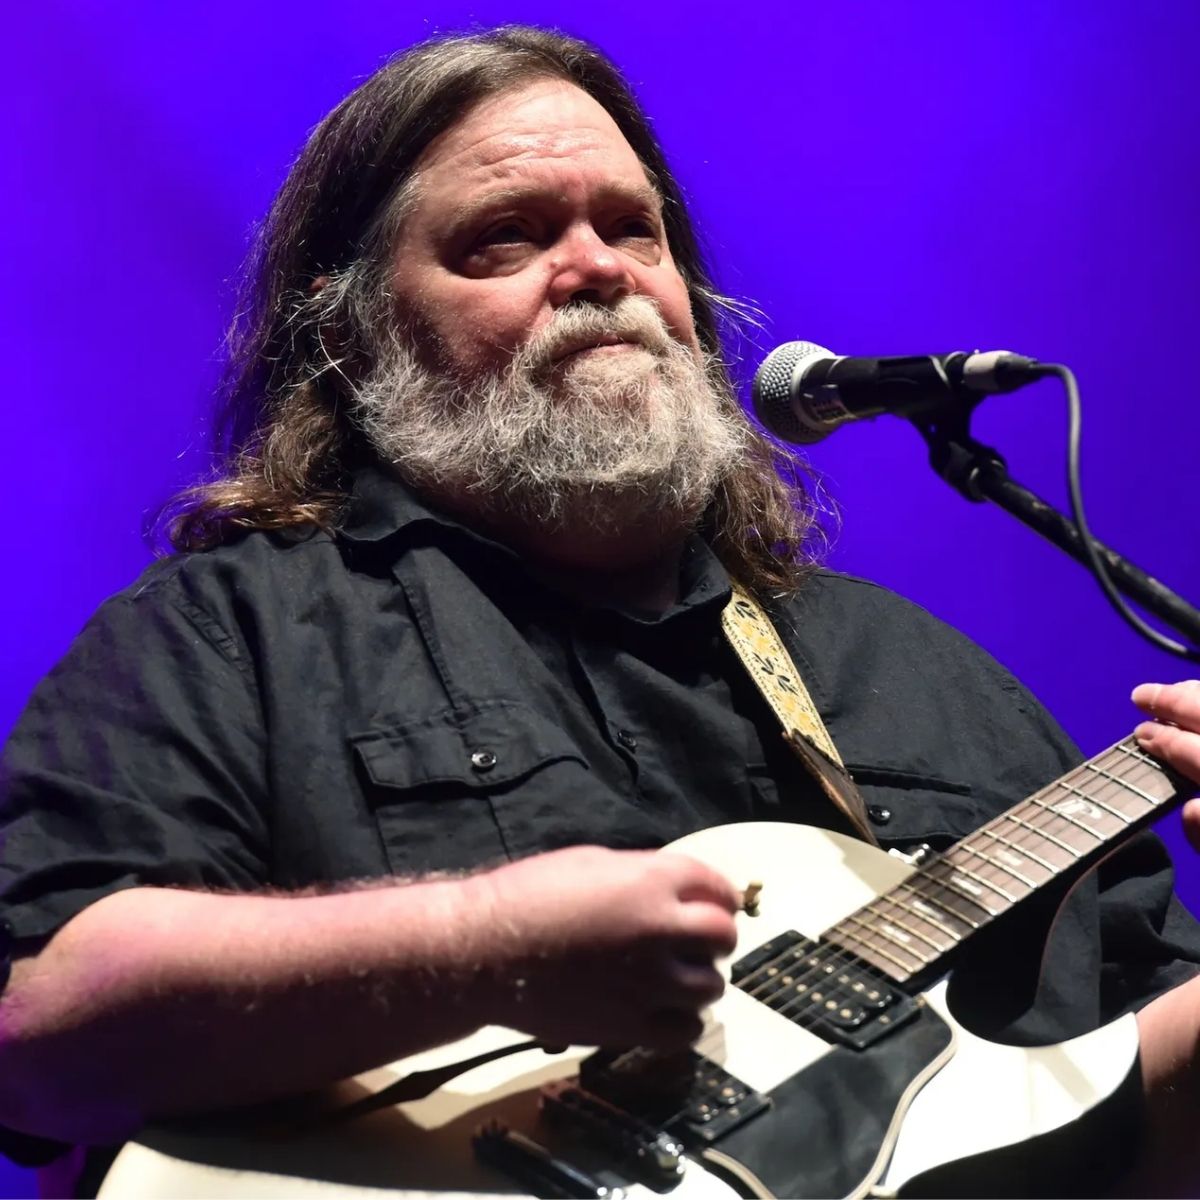 Roky Erickson performing on stage